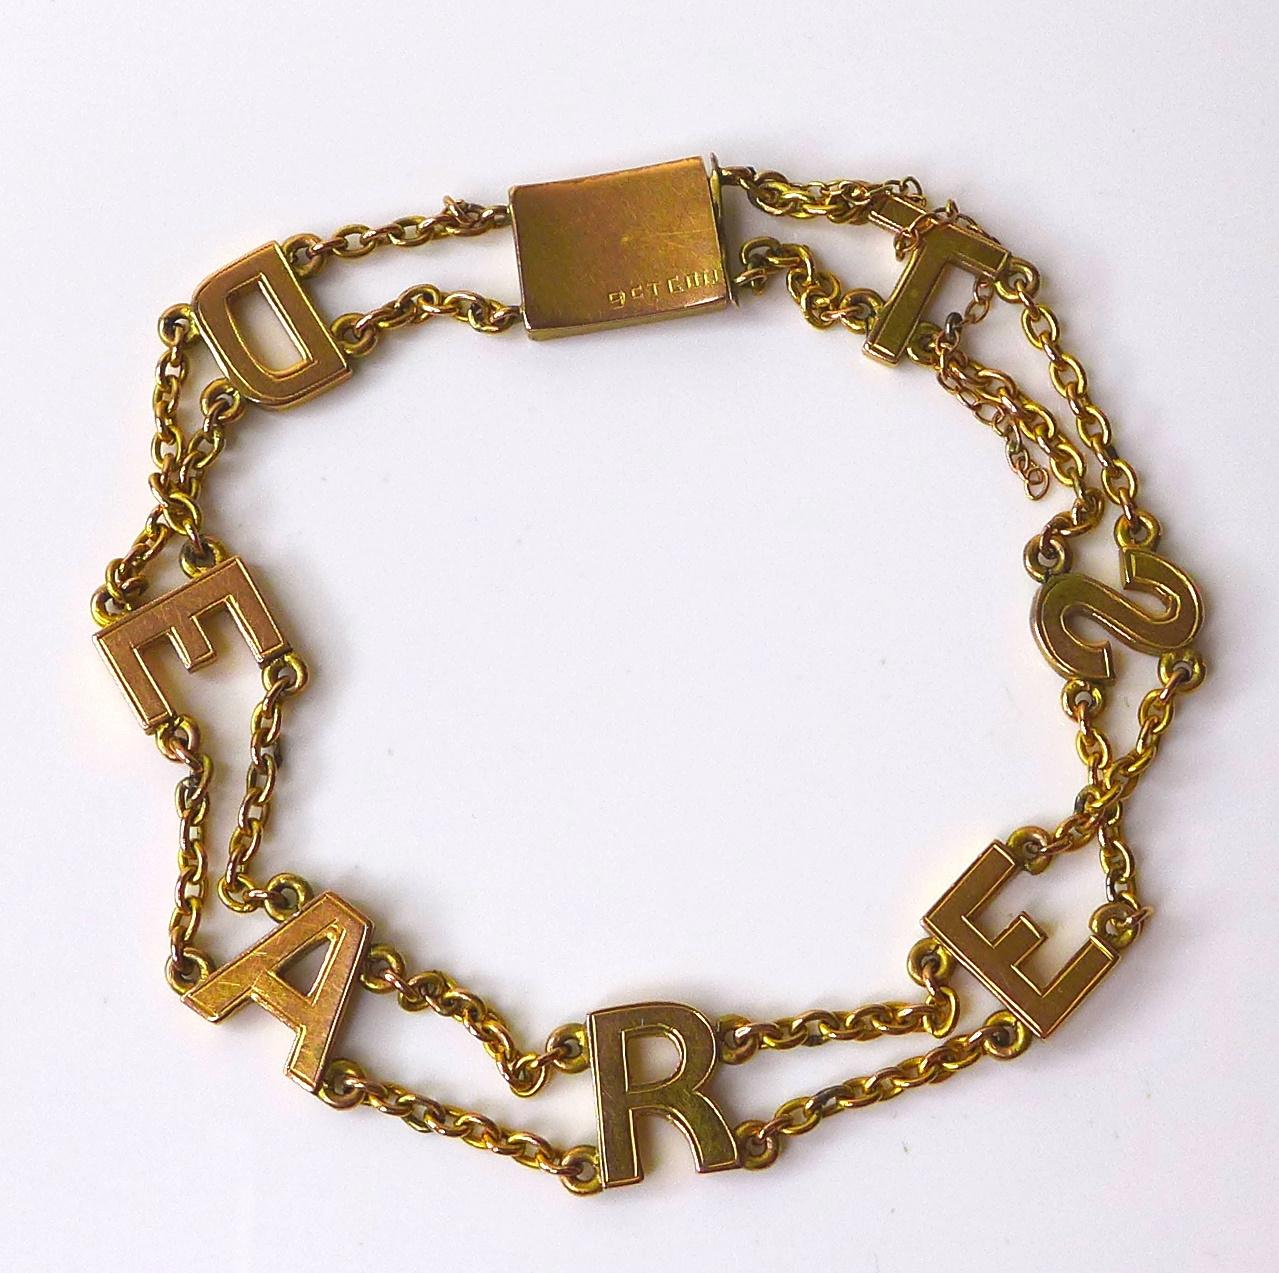 A 9ct gold 'Dearest' chain bracelet, early 20th century, stamped '9ct GOLD', 19cm, 10.4g. - Image 5 of 5